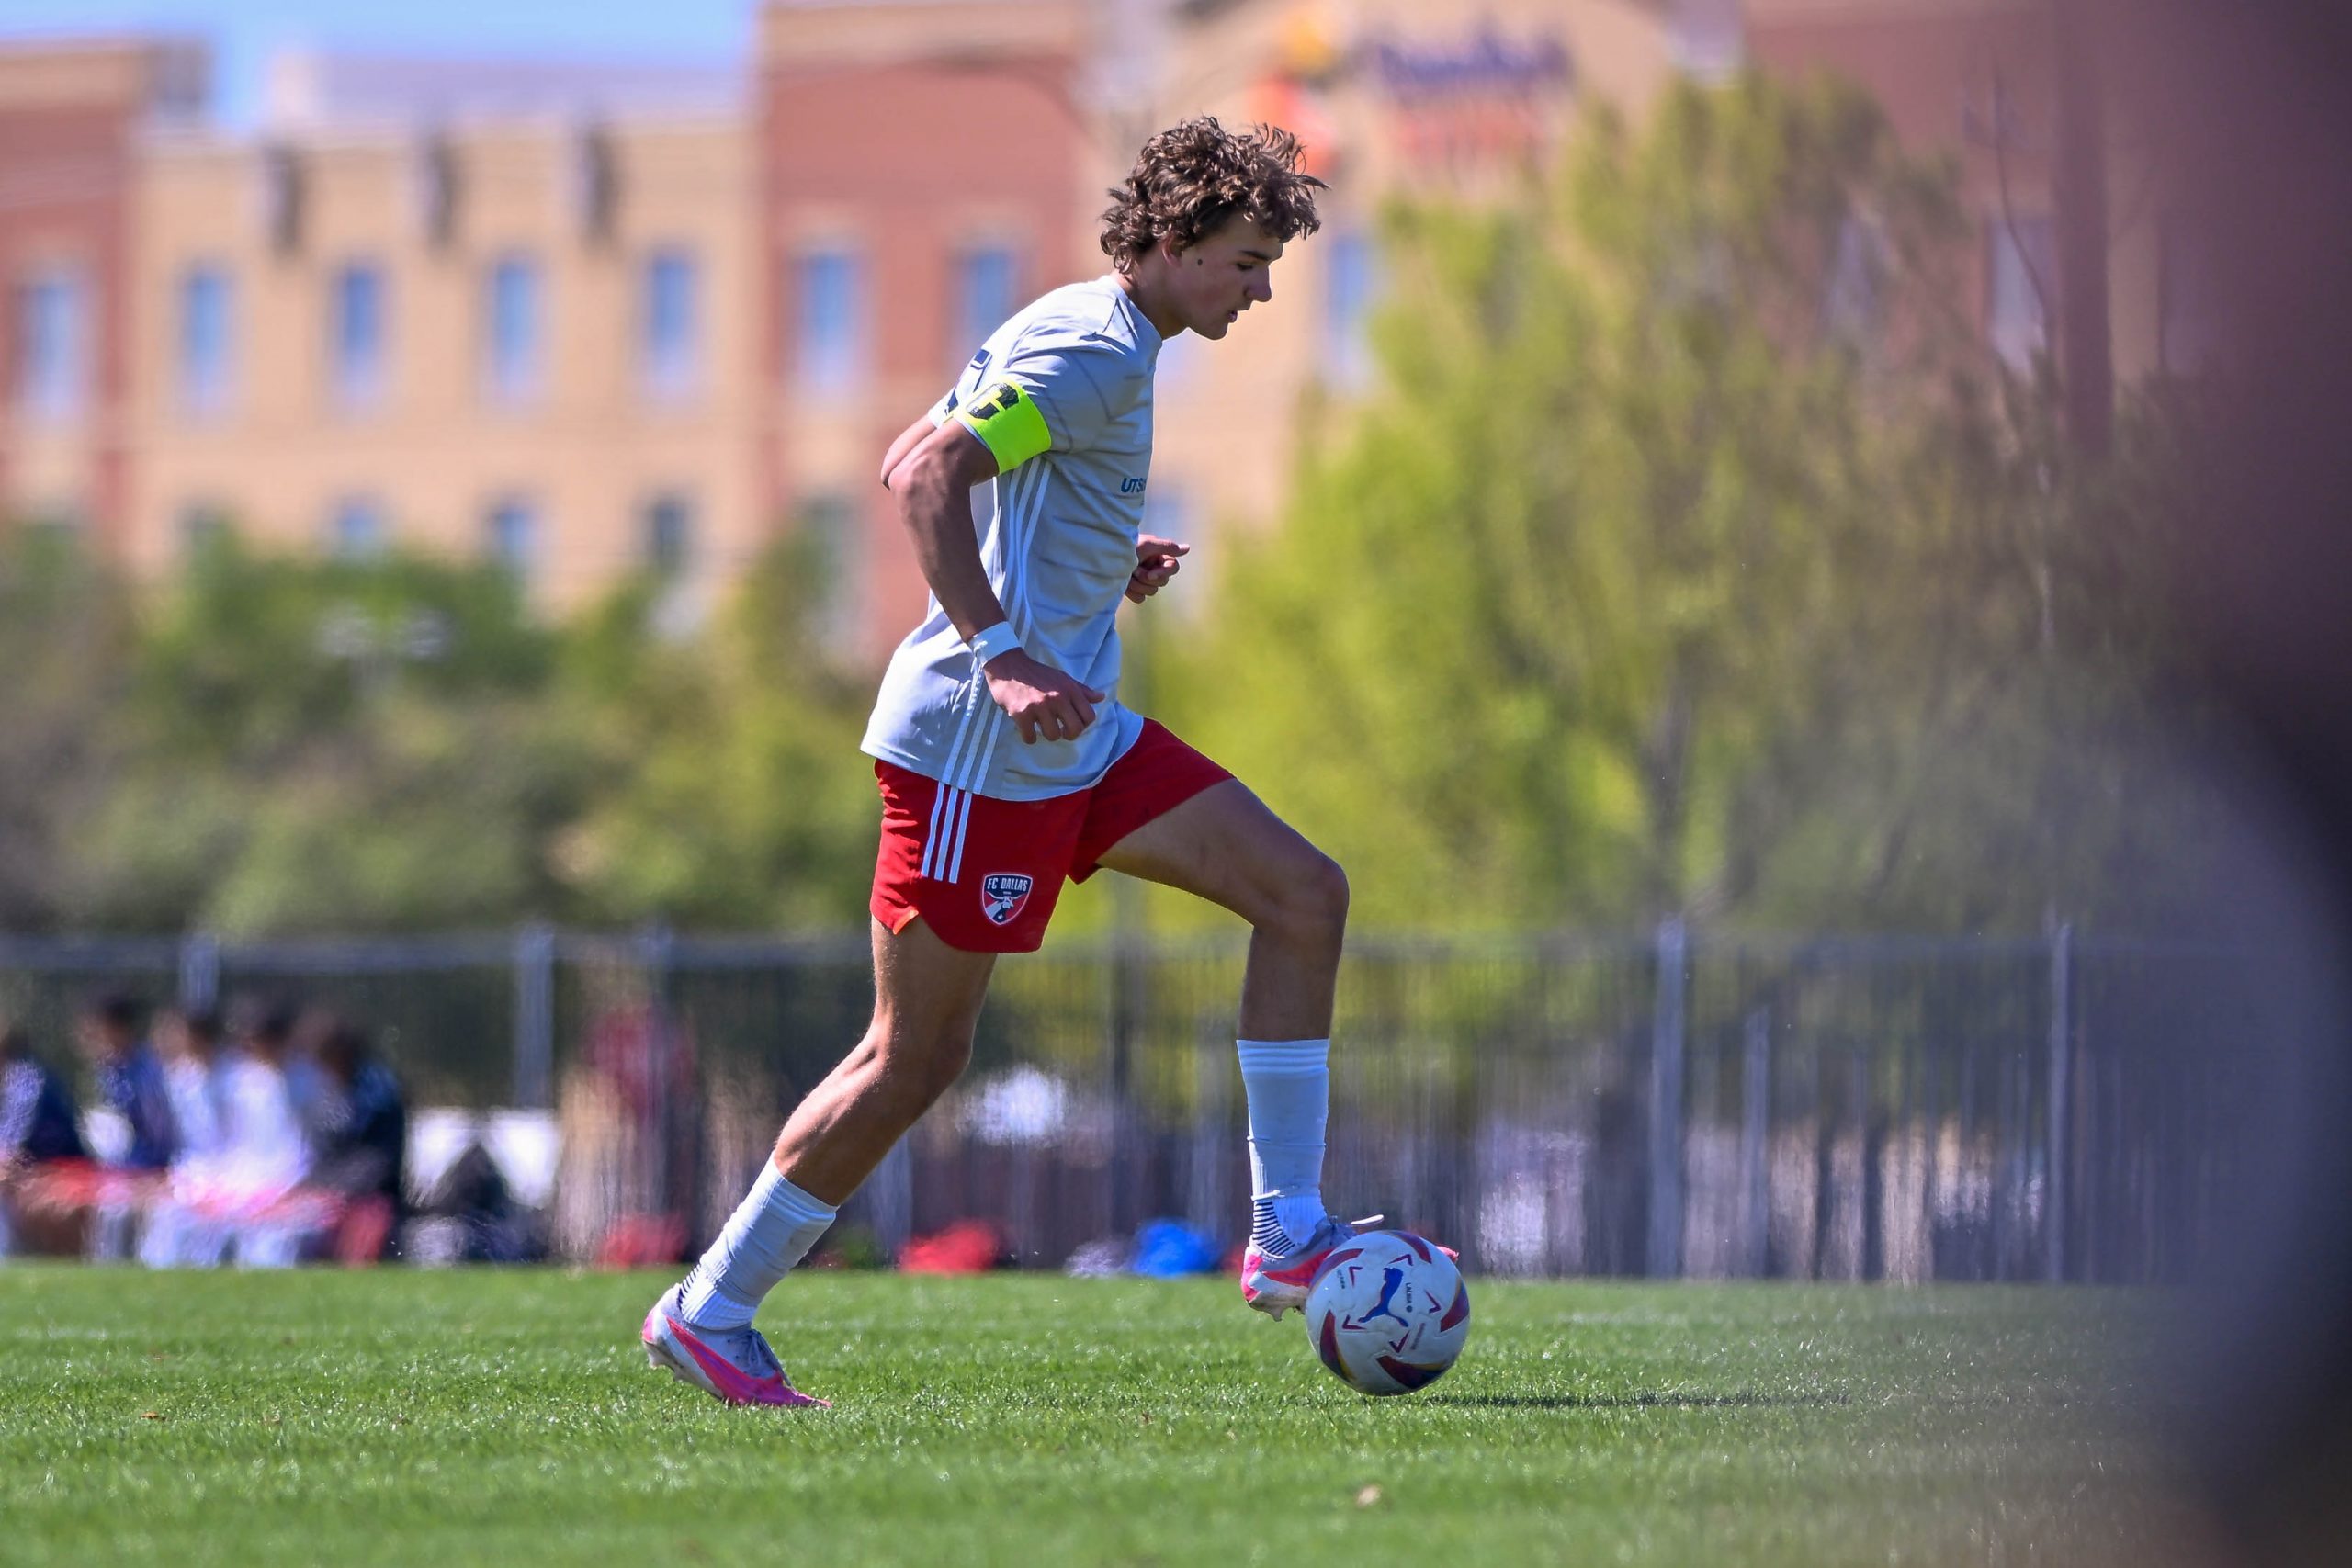 FC Dallas U17 ECNL White defender Antonie Van Tonder dribbles up field in the Dallas Cup match against Doral SC at Toyota Soccer Center on March 26, 2024. (Daniel McCullough, 3rd Degree)